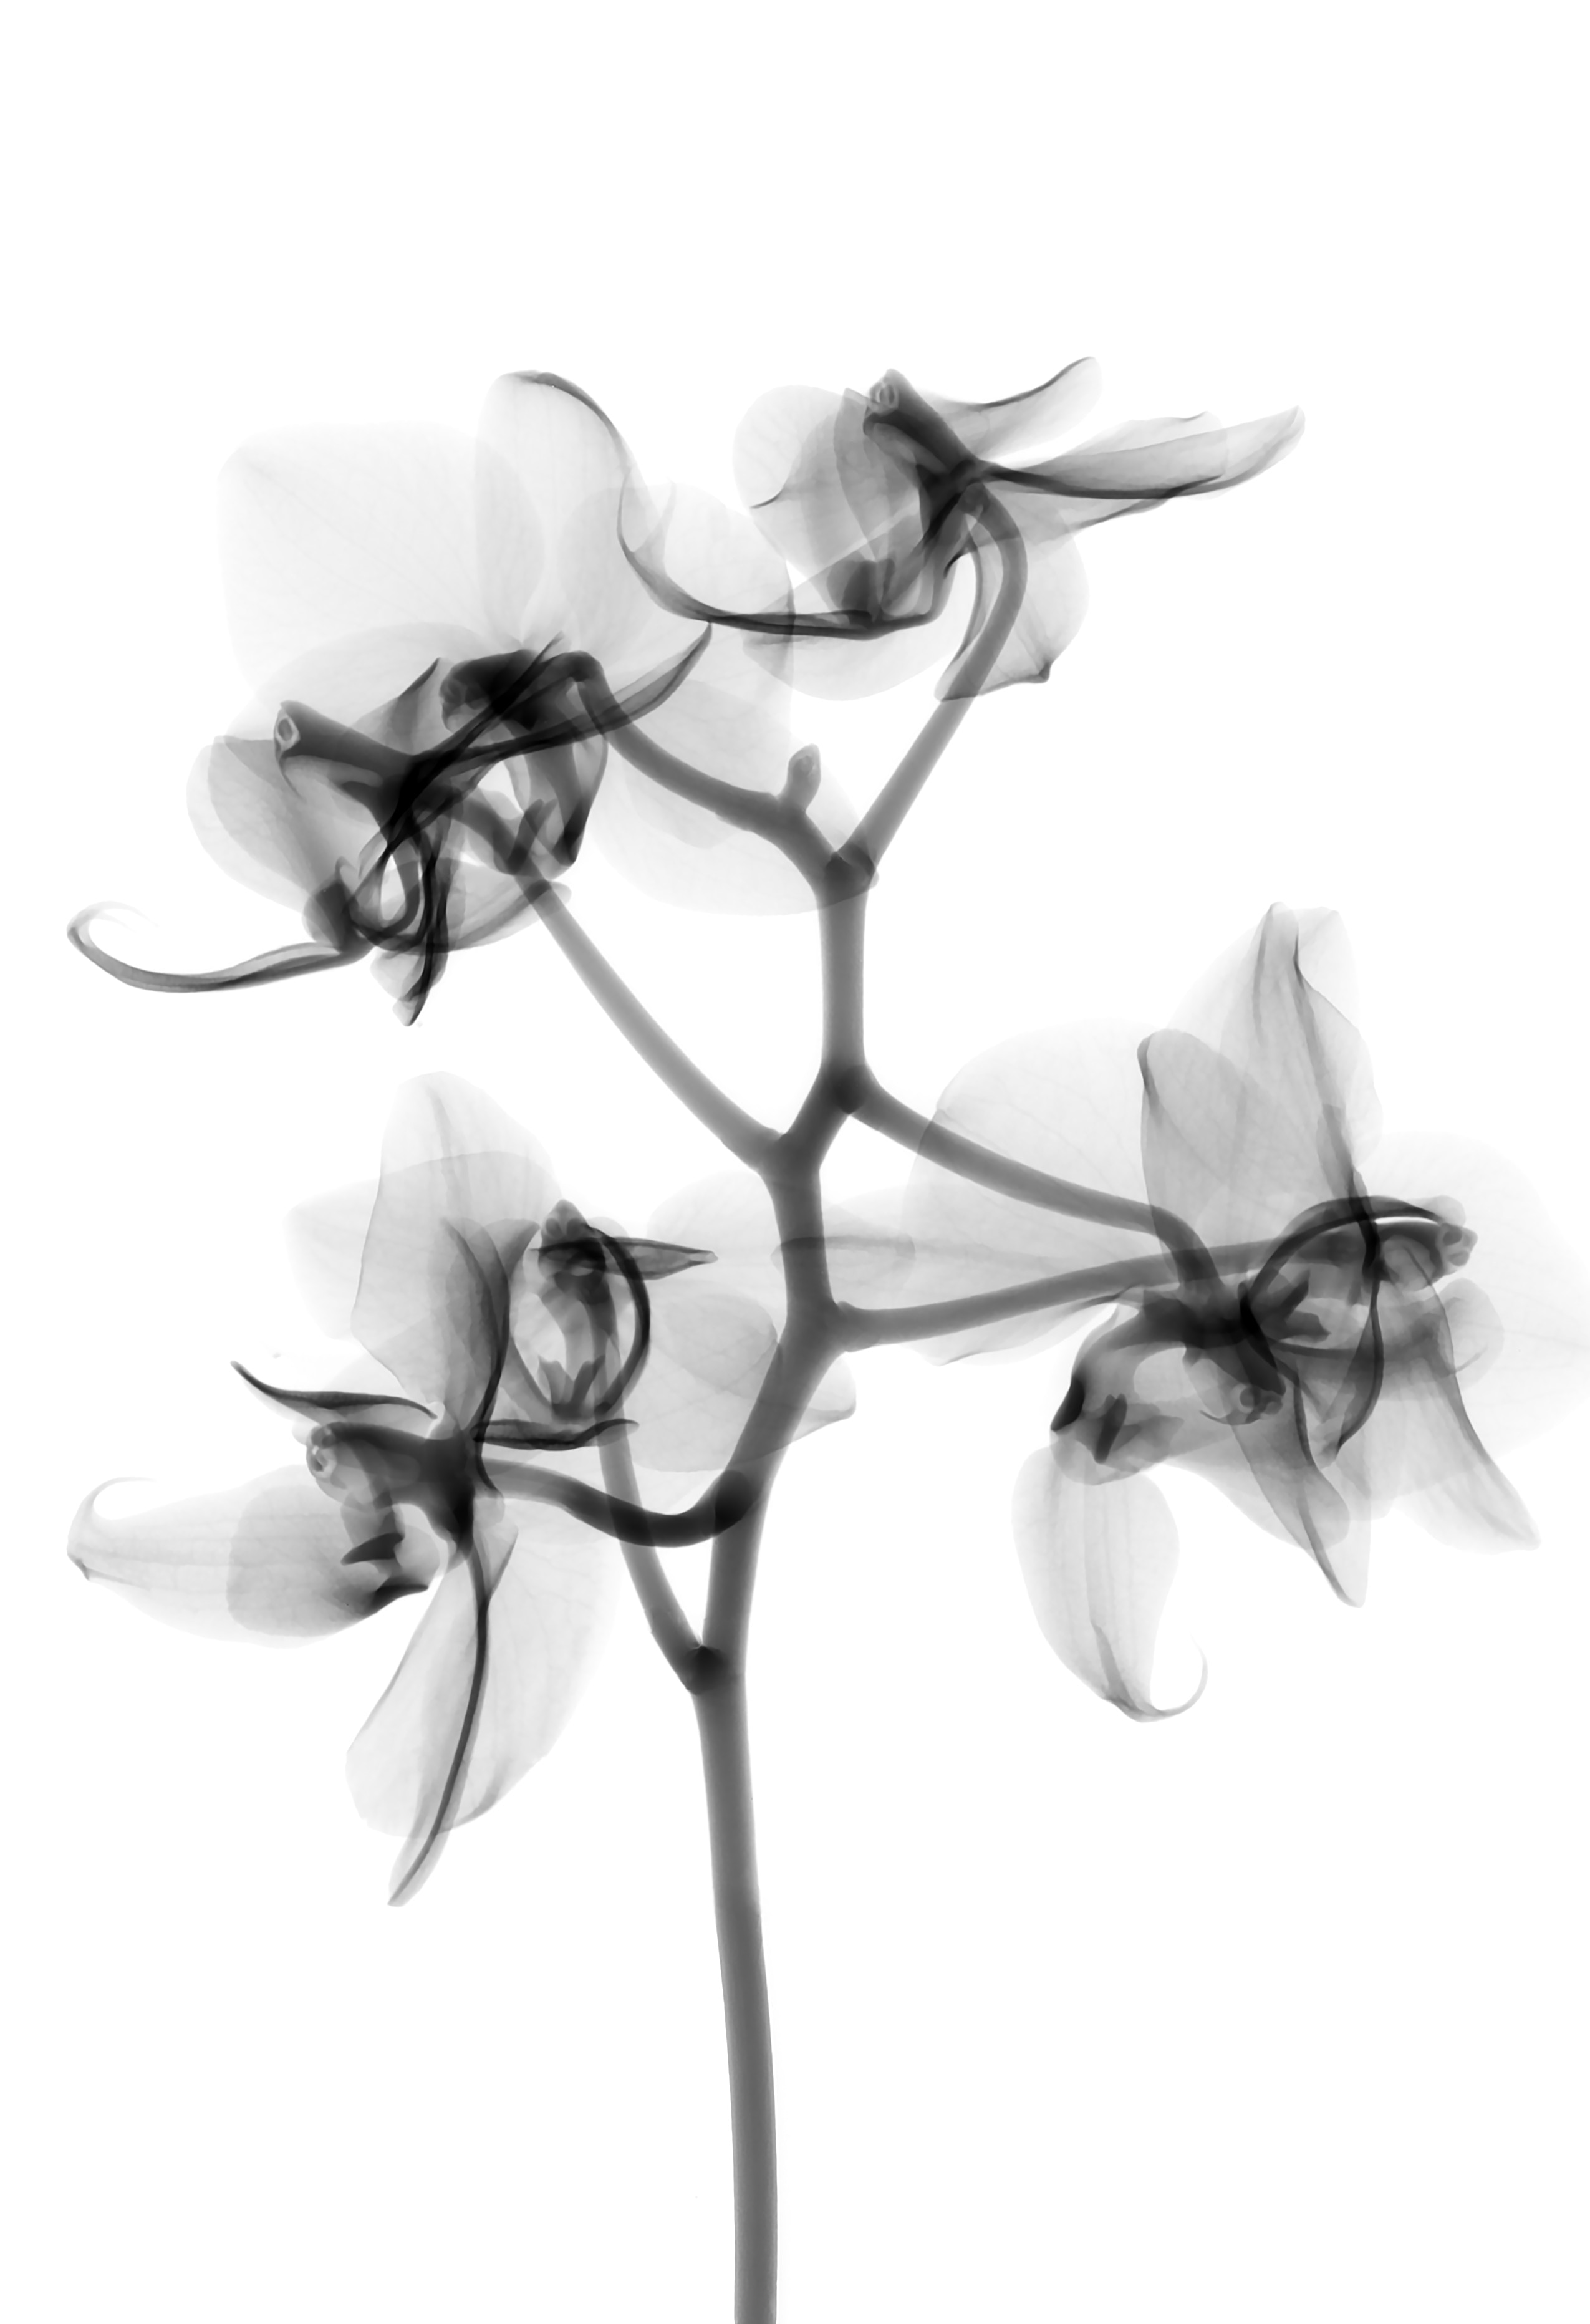 Orchid structure (credit: Photo by Paul Talbot on Unsplash)